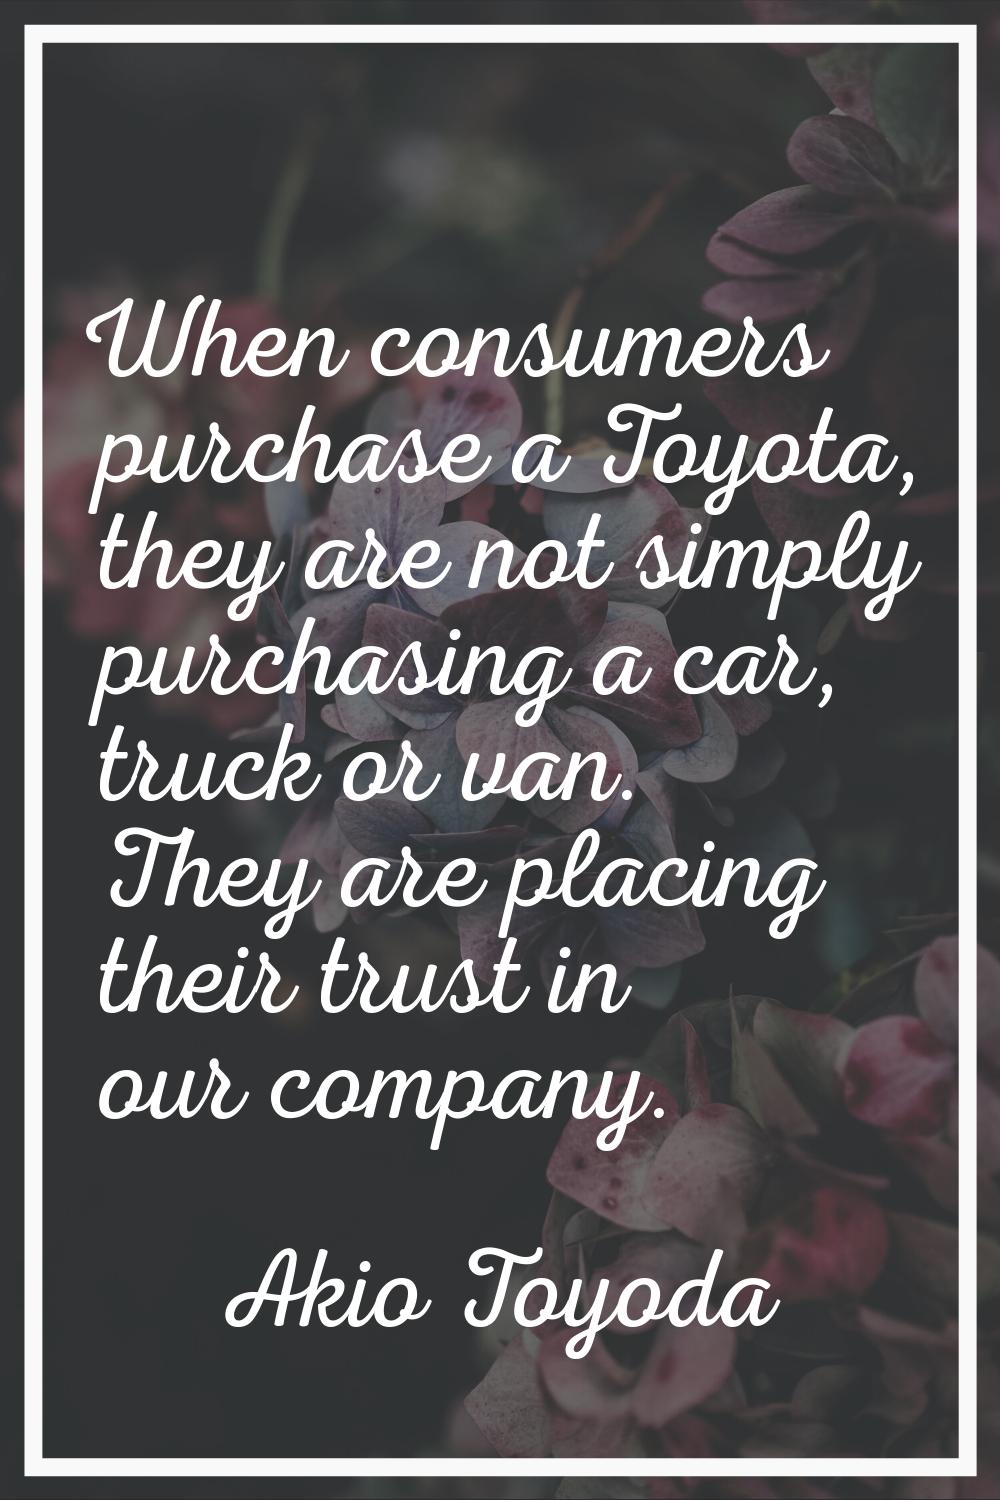 When consumers purchase a Toyota, they are not simply purchasing a car, truck or van. They are plac